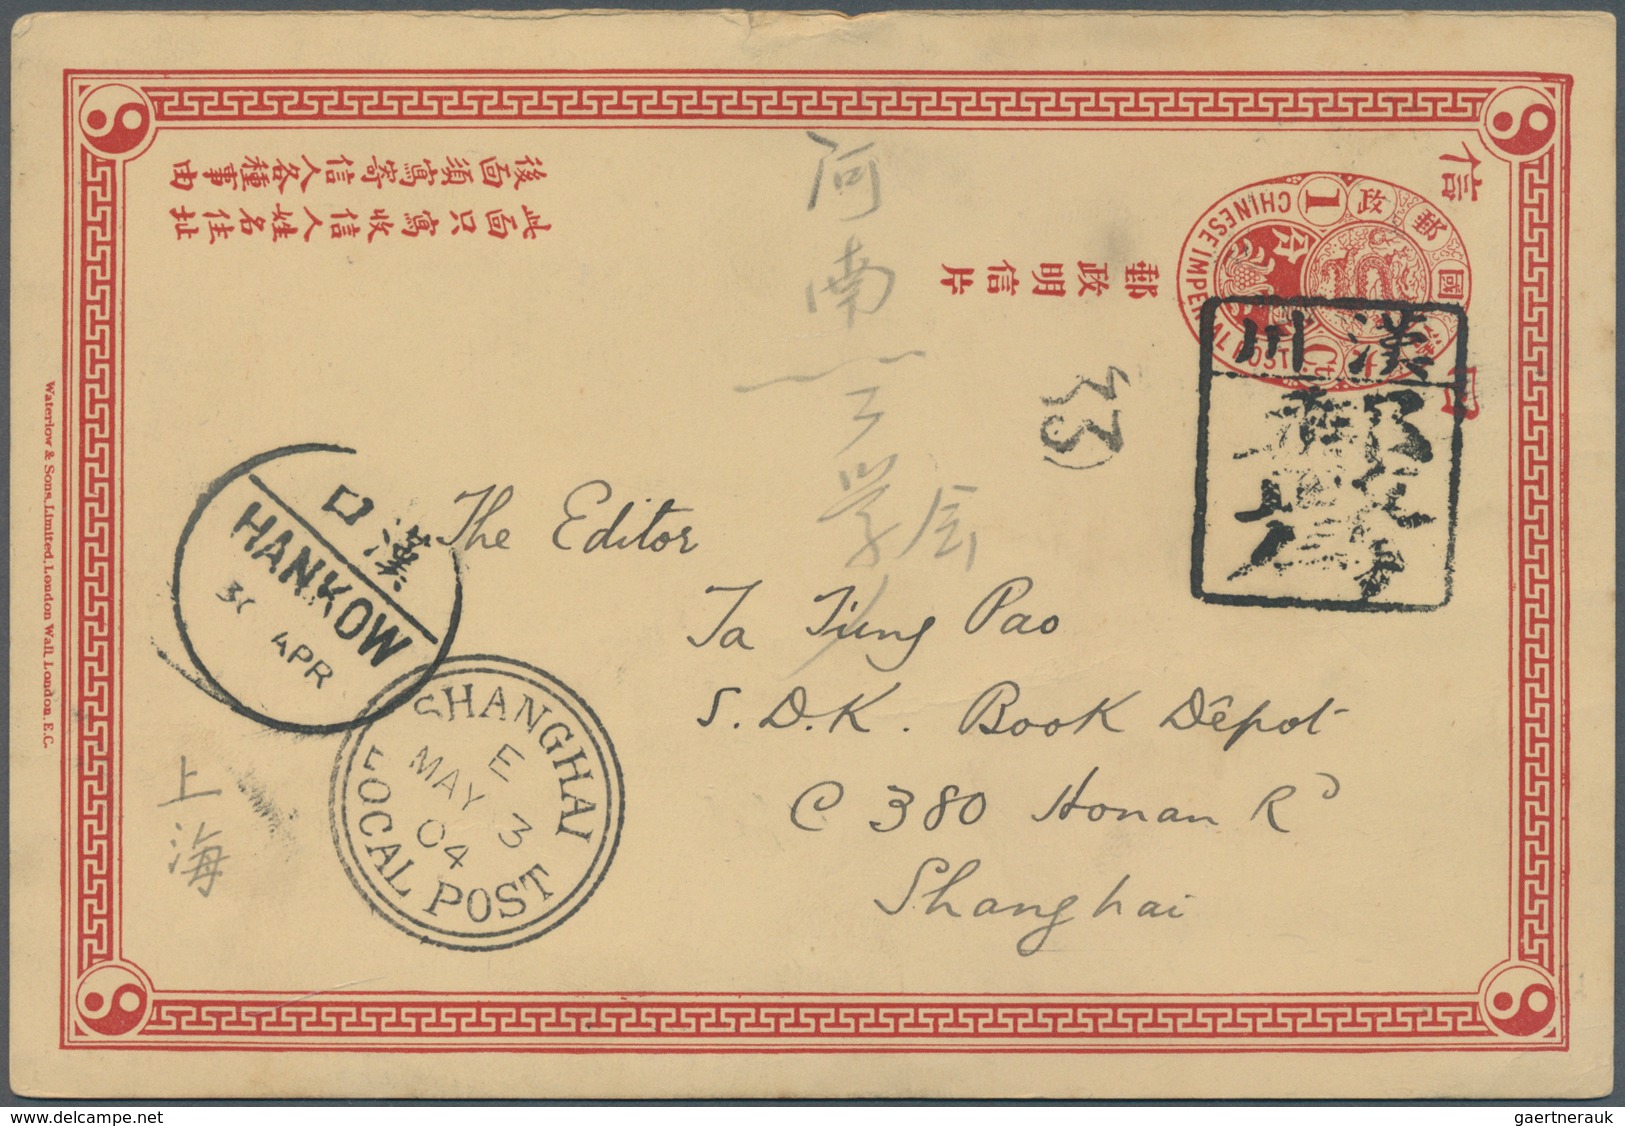 China - Ganzsachen: 1904. Postal Stationery Second Issue Chinese Imperial Post Reply Card One Cent C - Cartes Postales